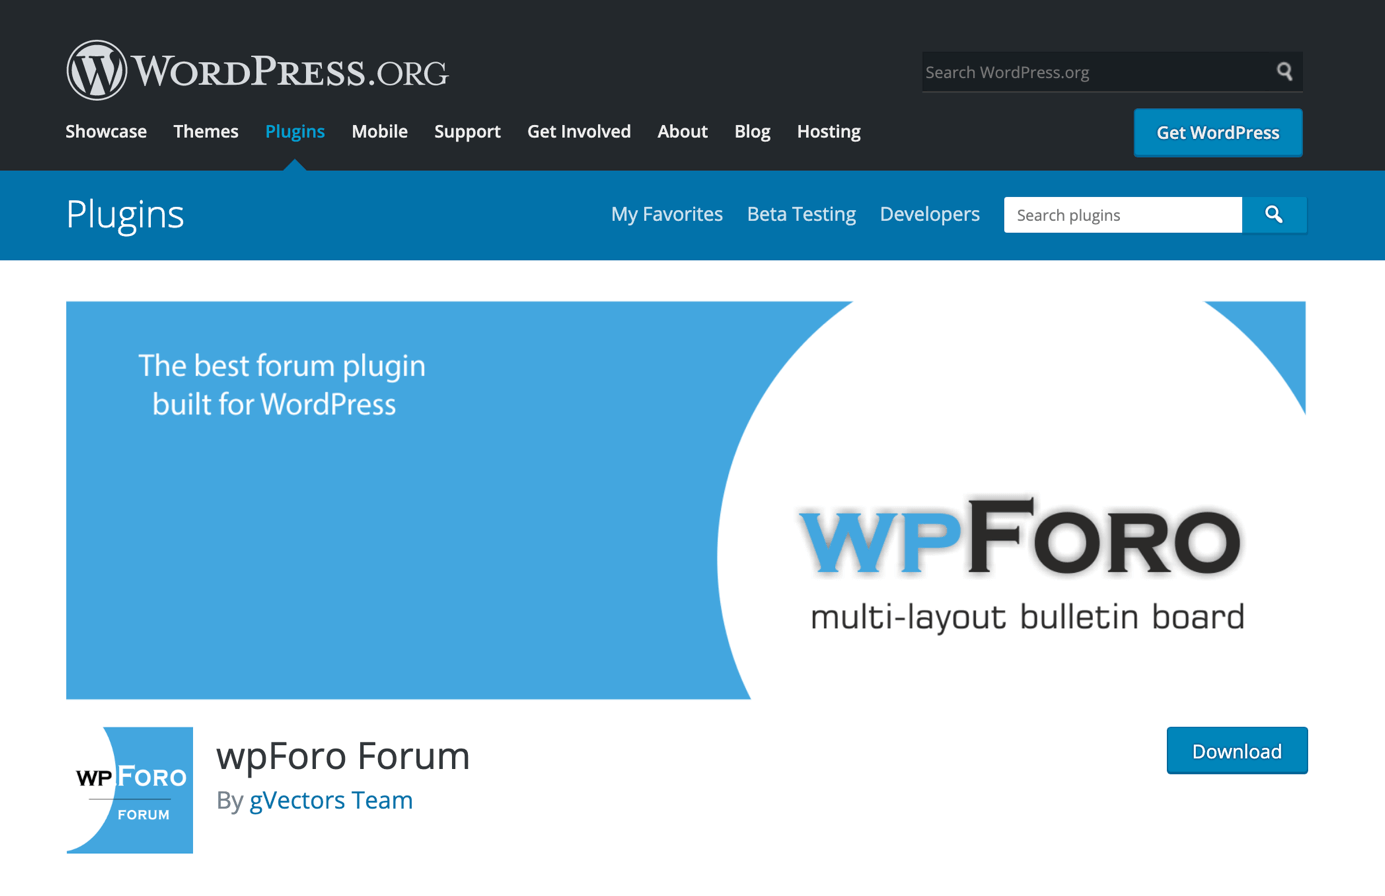 Download page for wpForo Forum on WordPress.org